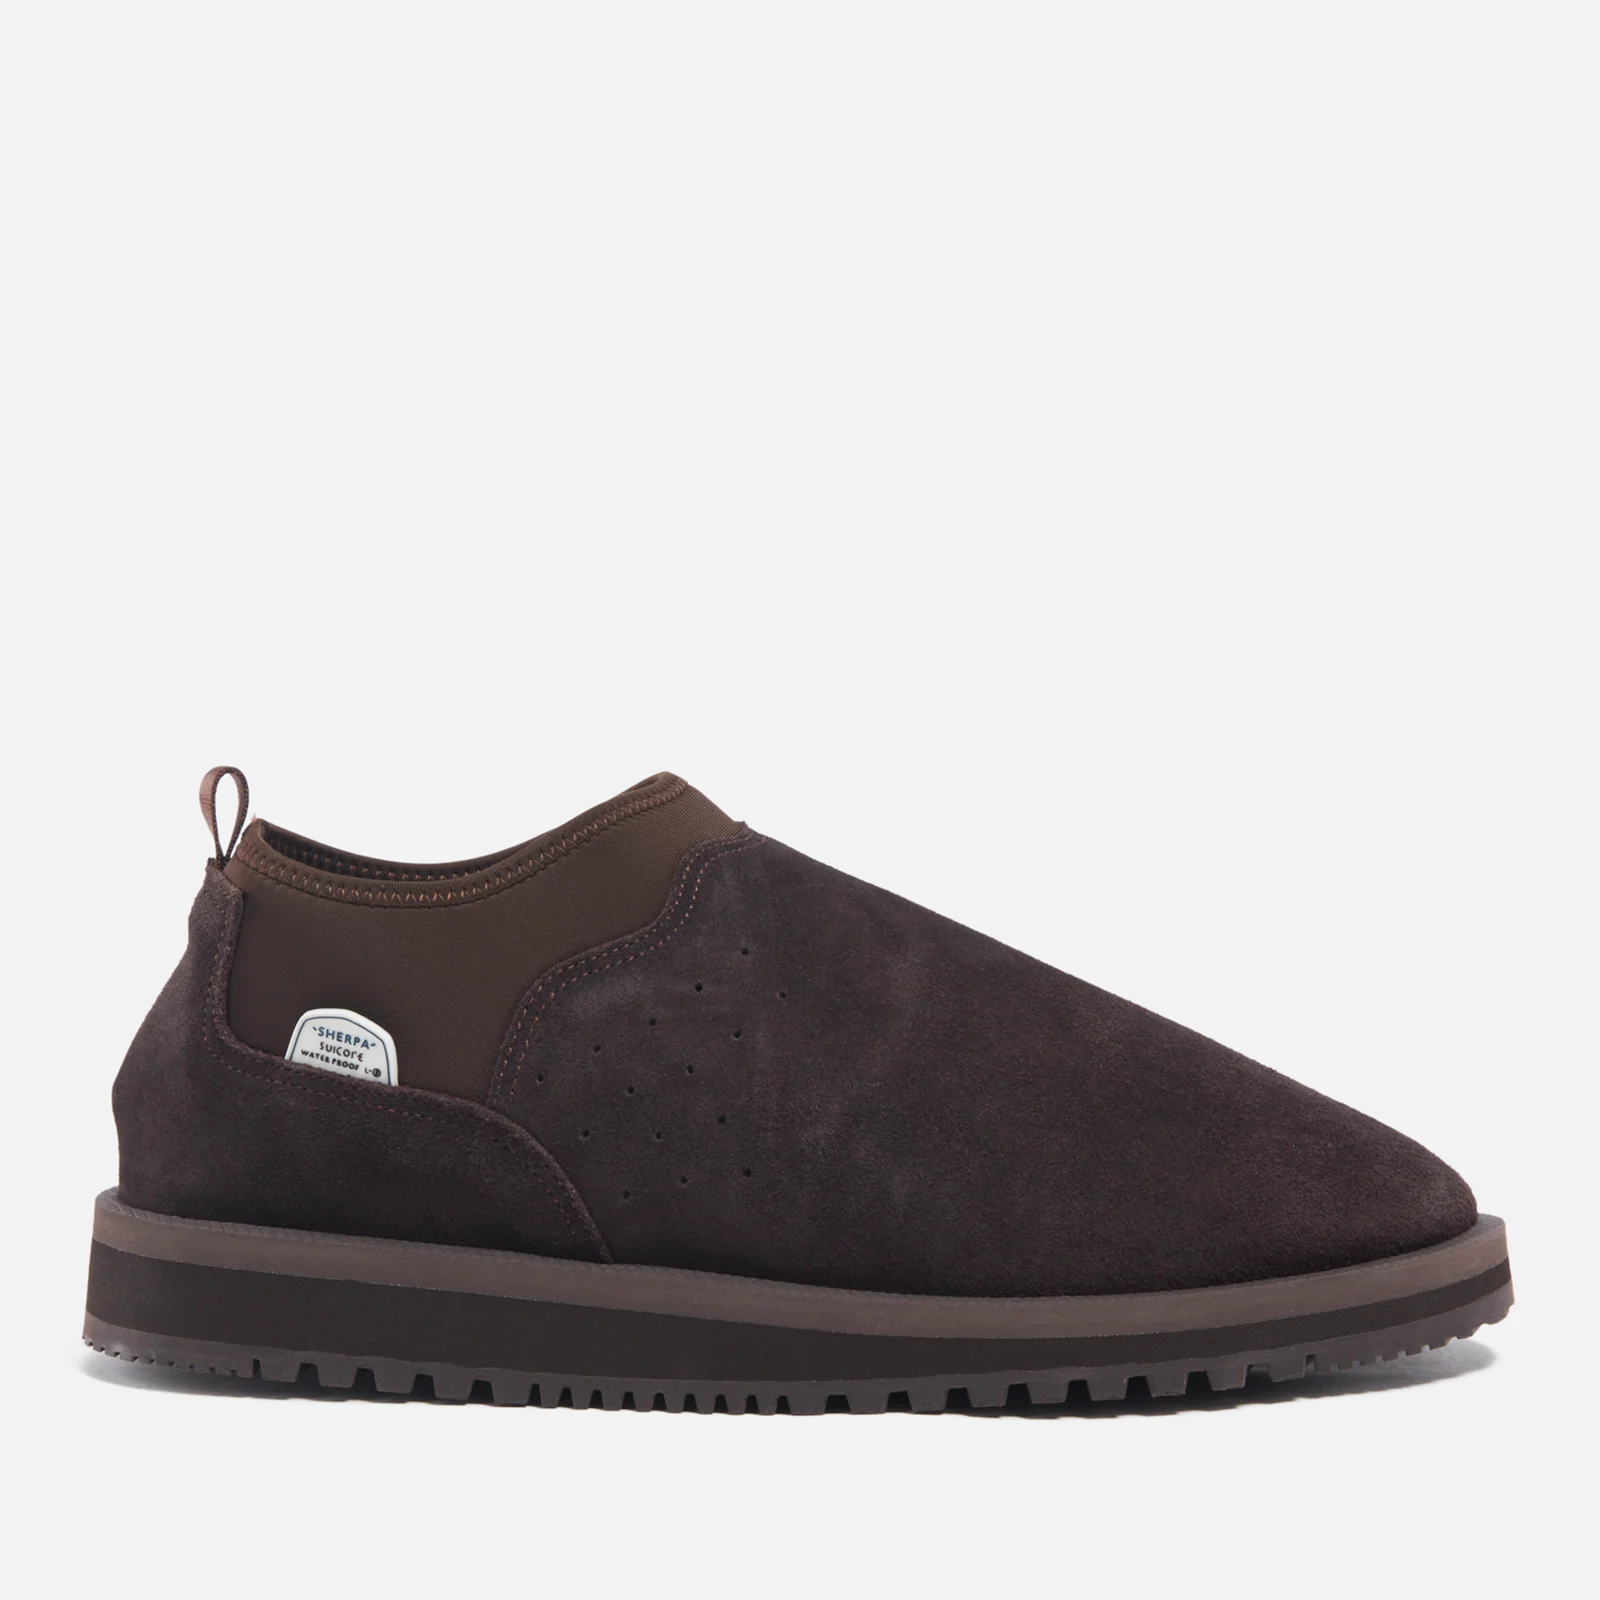 Suicoke Men's RON-M2ab-MID Suede and Jersey Boots Image 1